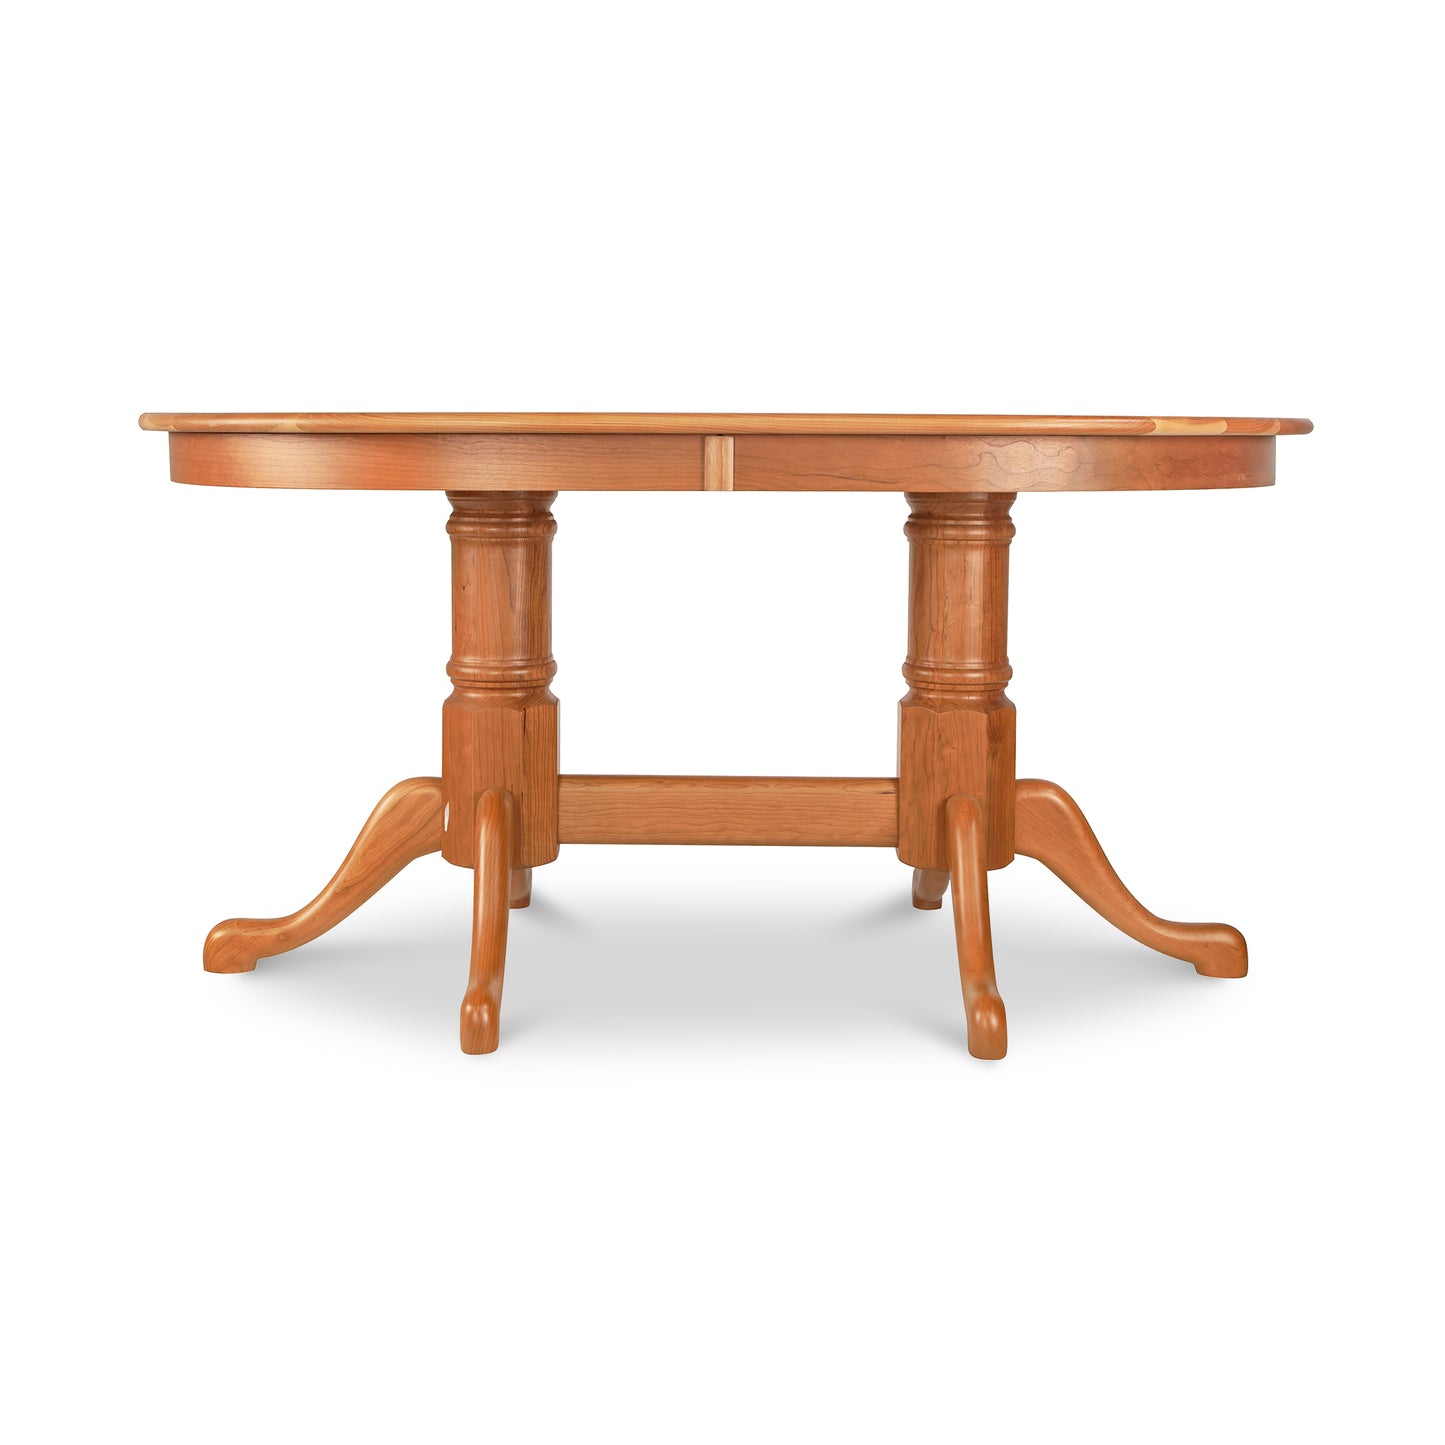 A Cabriole Oval Double Pedestal Solid Top Table with cabriole table feet from Lyndon Furniture.